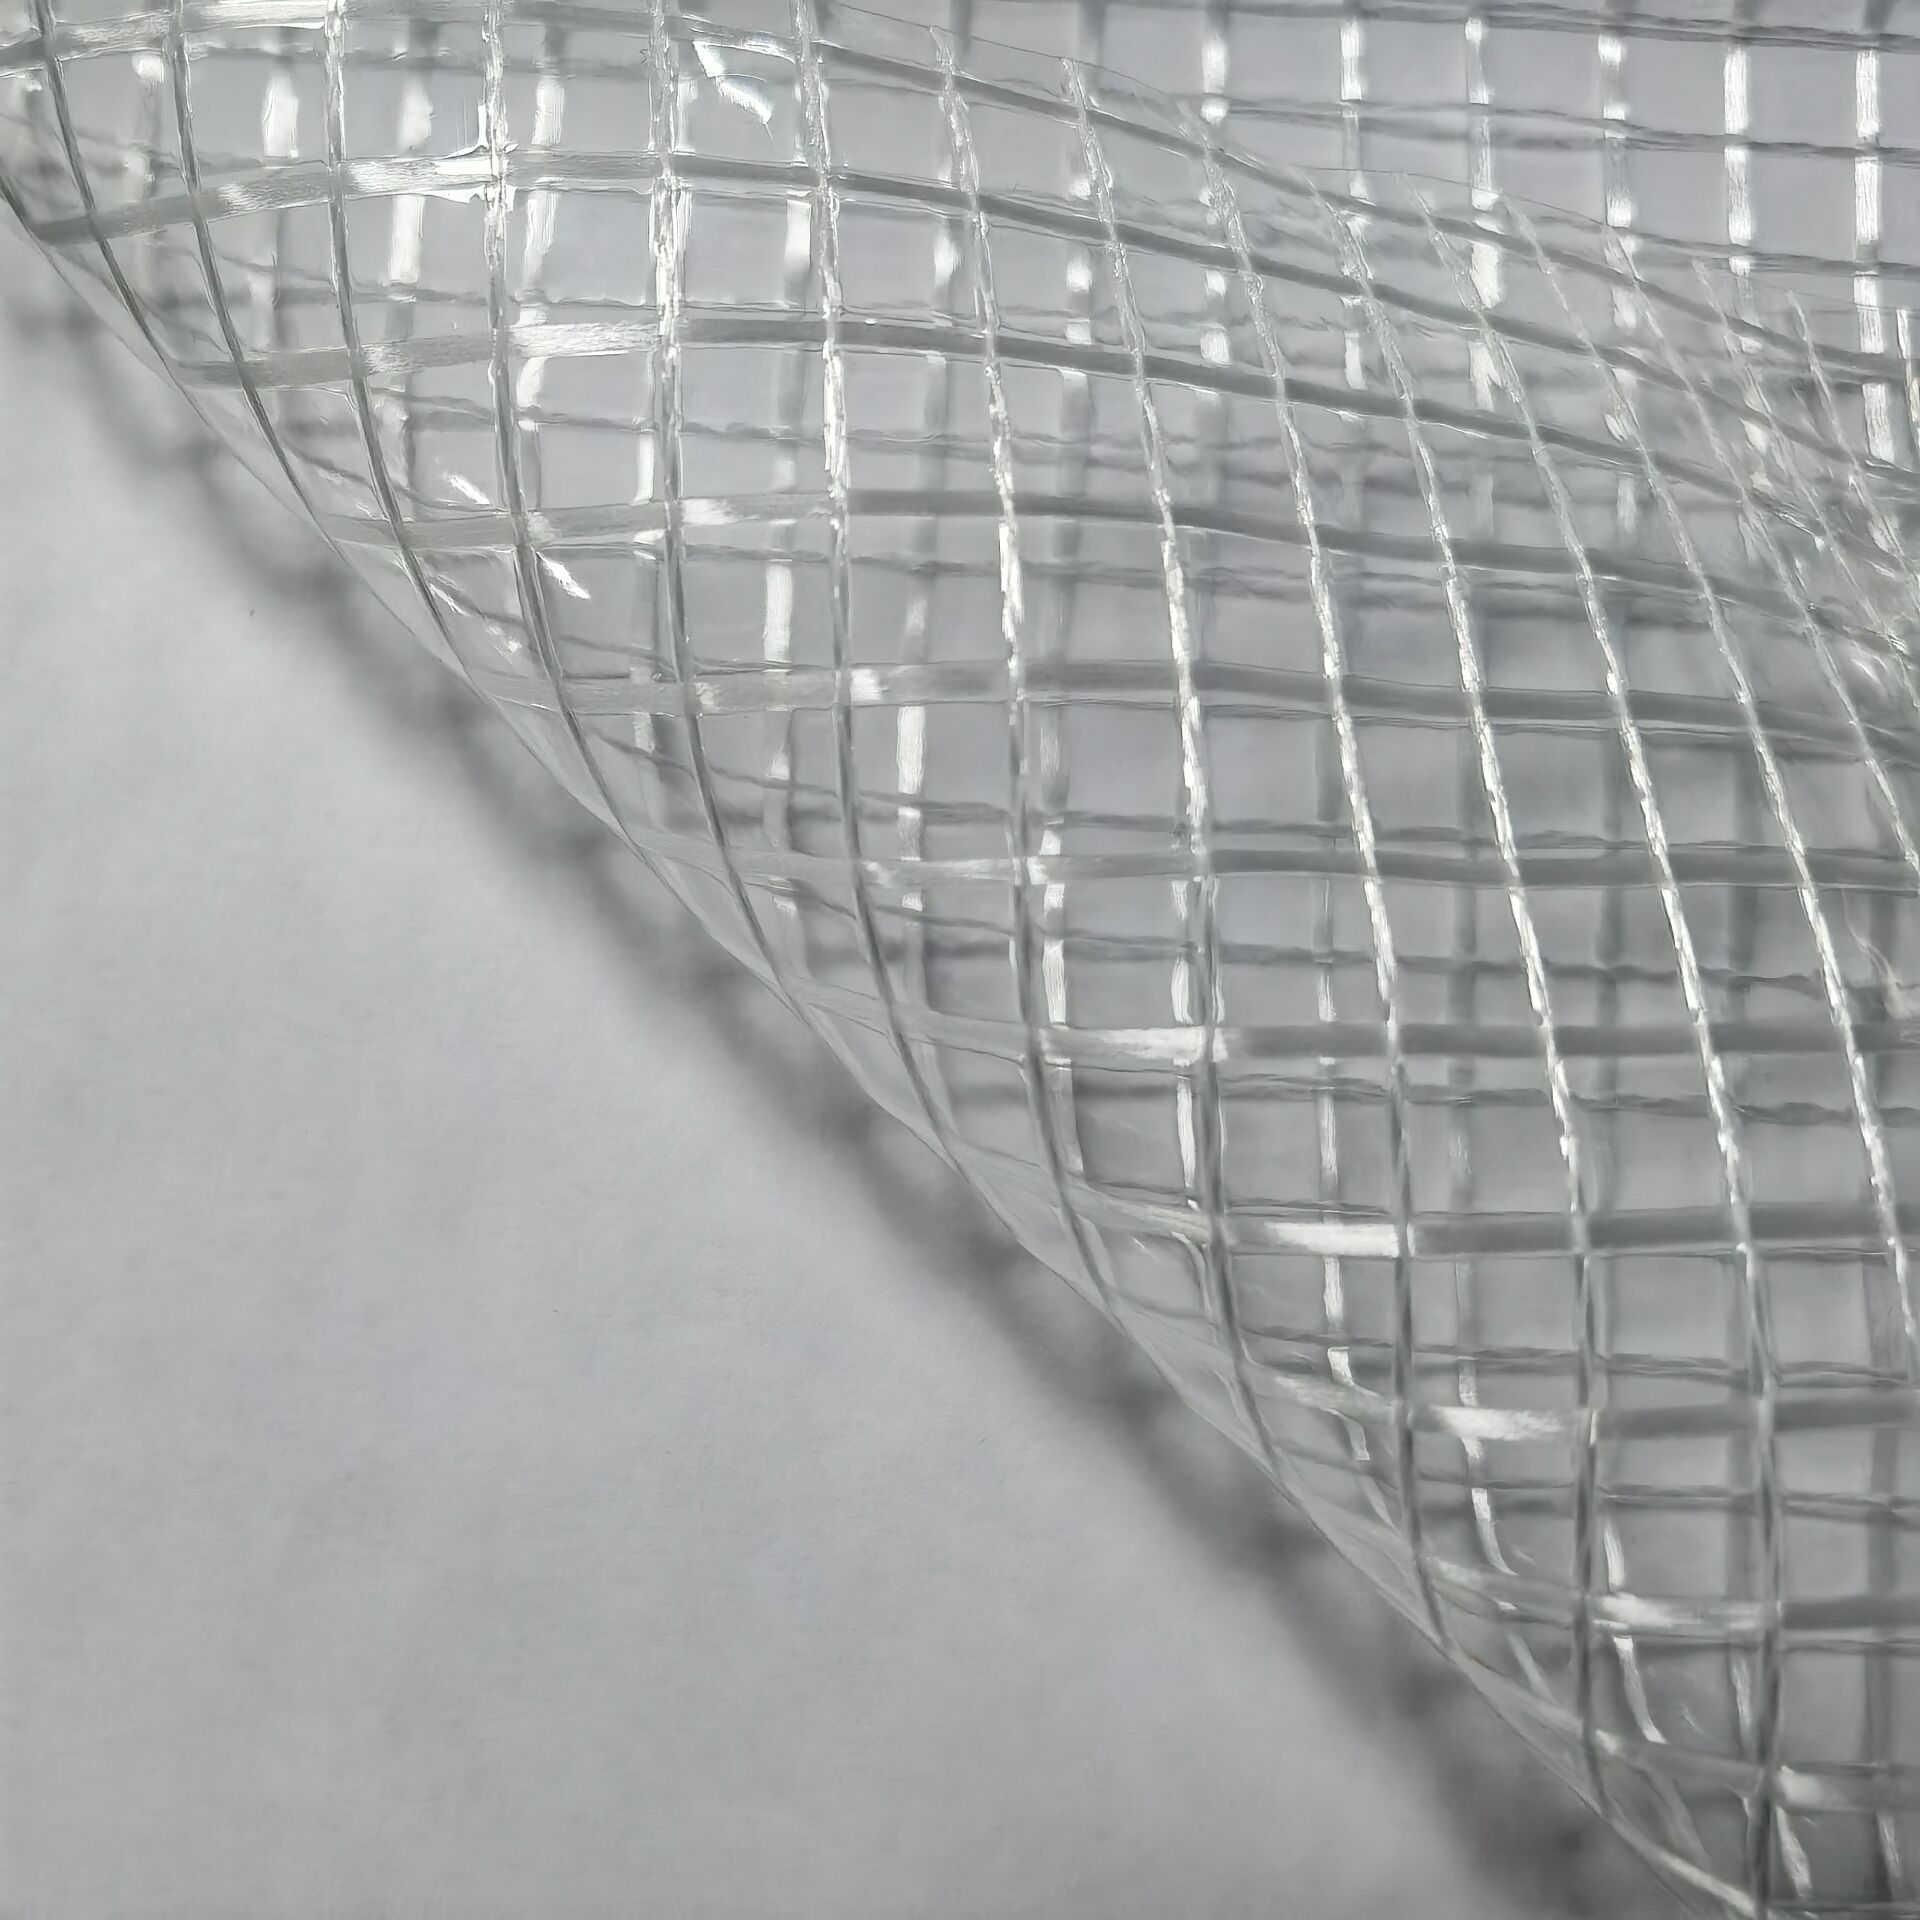 UV-Resistant White Transparent PVC Tarpaulin: Ideal for Event Tent Covers and Maritime Tents